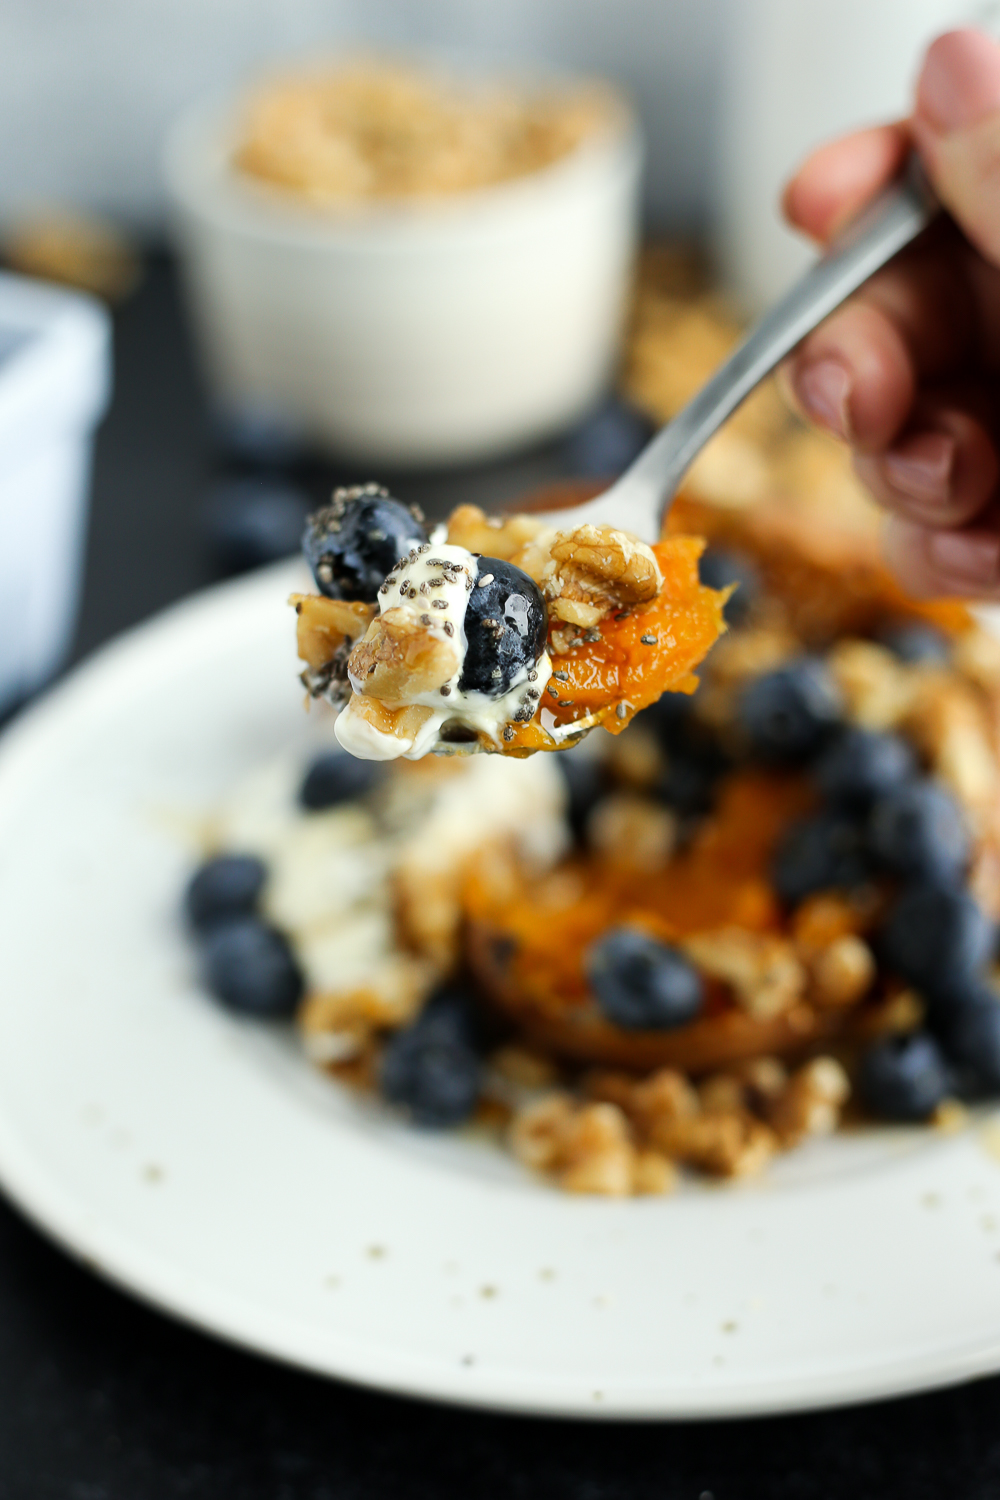 A woman's hand holds a silver spoon piled high with cooked sweet potato, a few blueberries, chopped walnuts, and a small amount of yogurt. The mixed bite is topped with a few chia seeds and the rest of the dish is blurred in the background